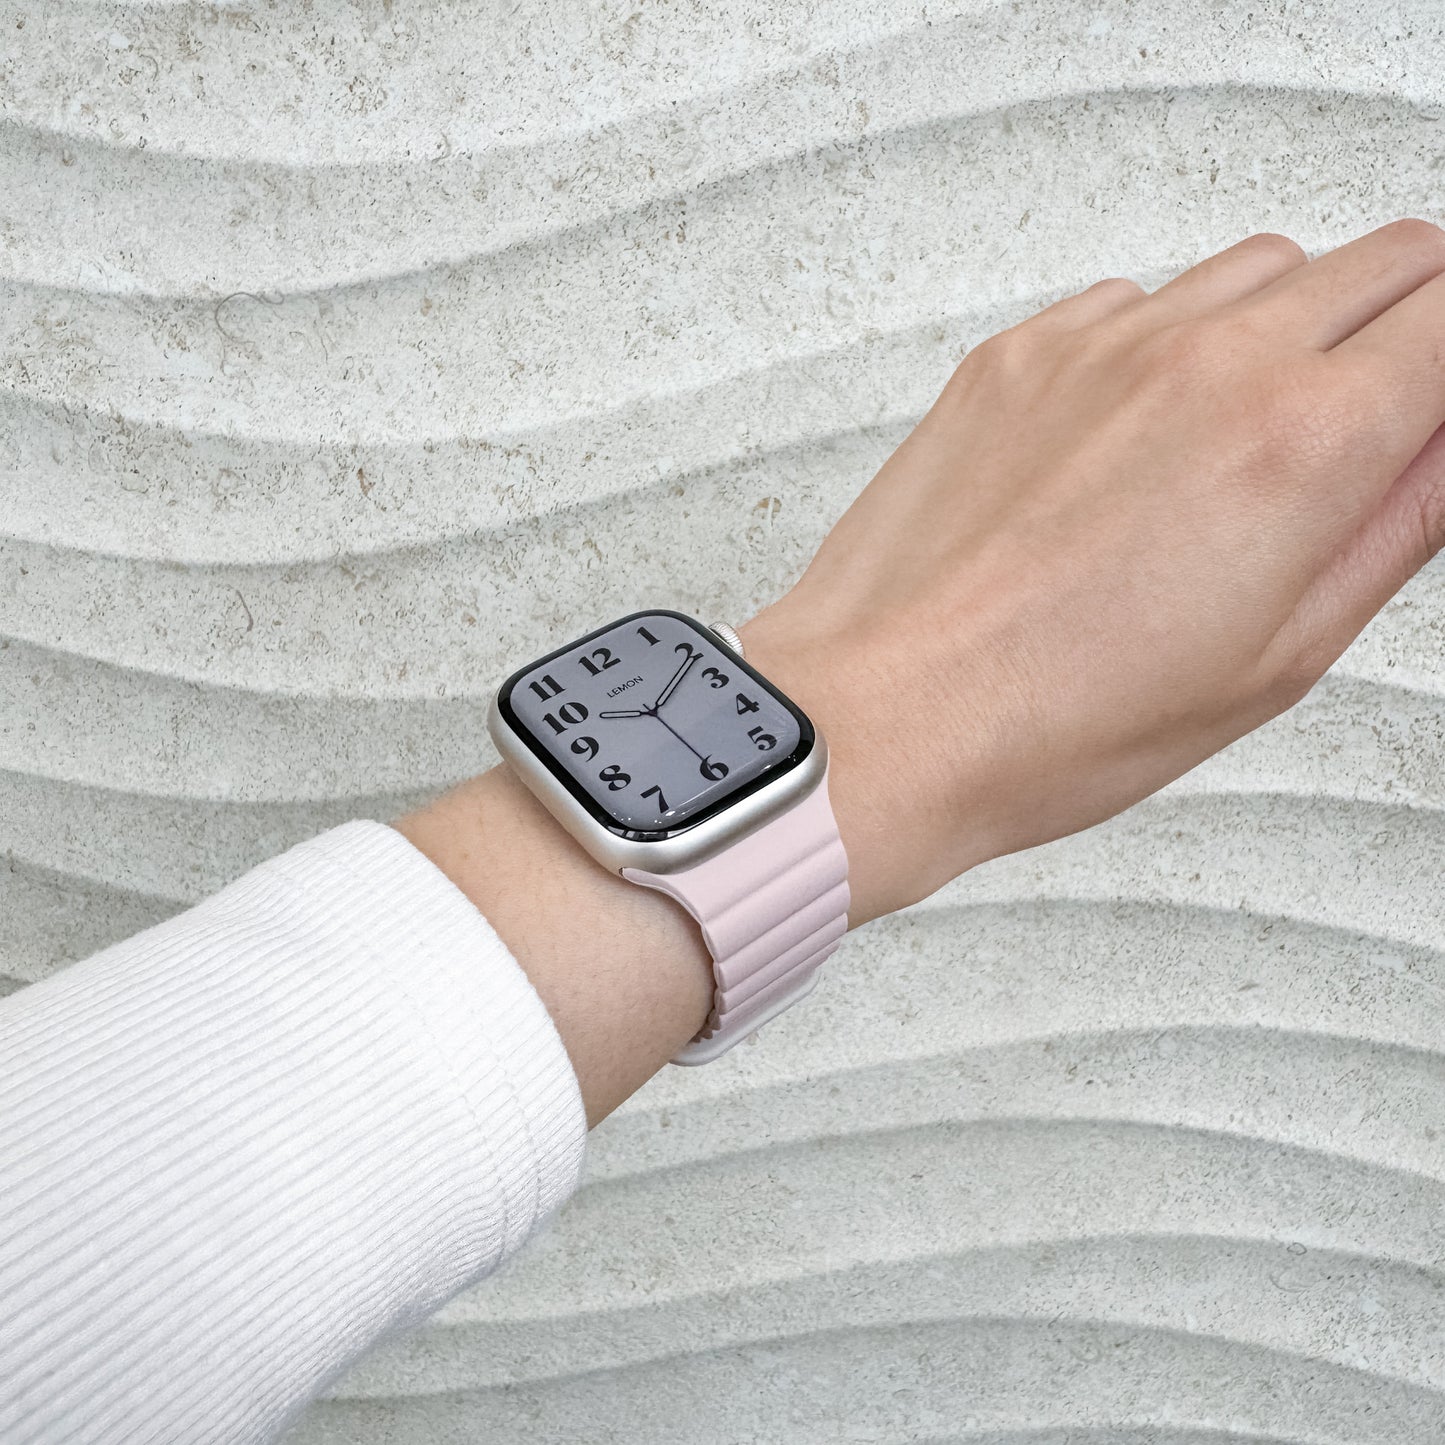 Snap Rubber Apple Watch Band - Pink & Starlight